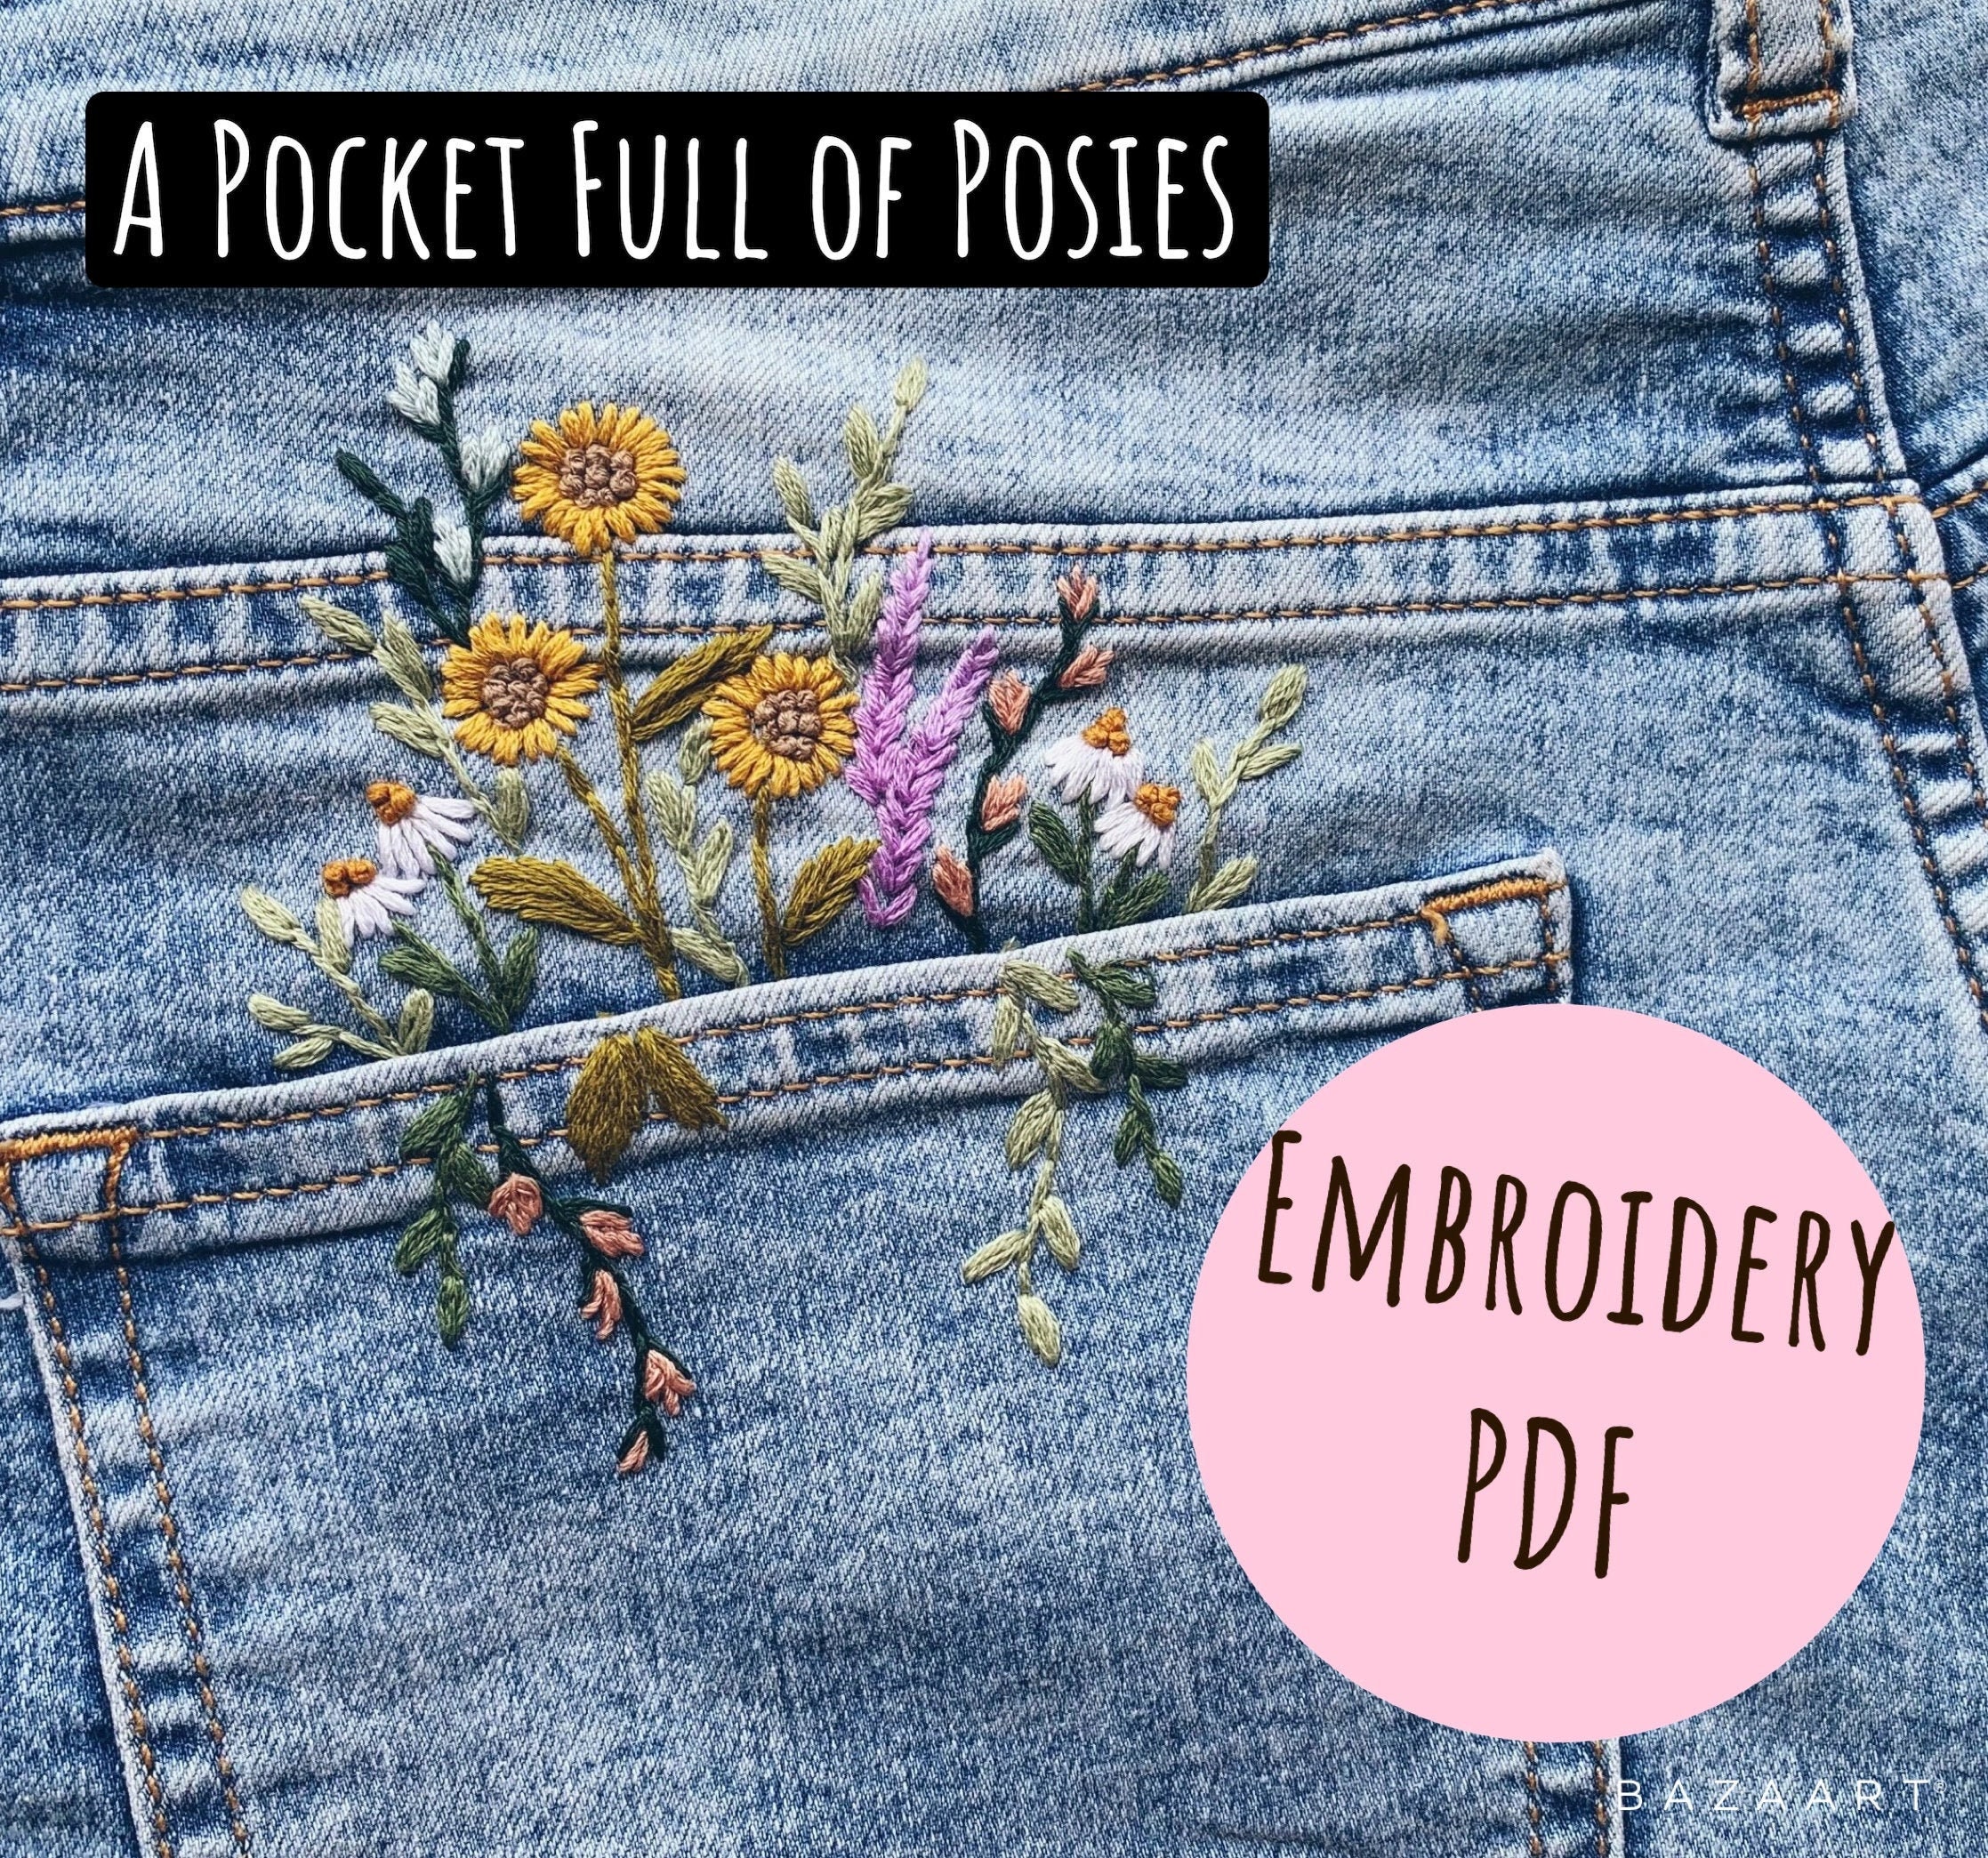 Creating my way to Success: Pot holders from jeans pockets - a tutorial